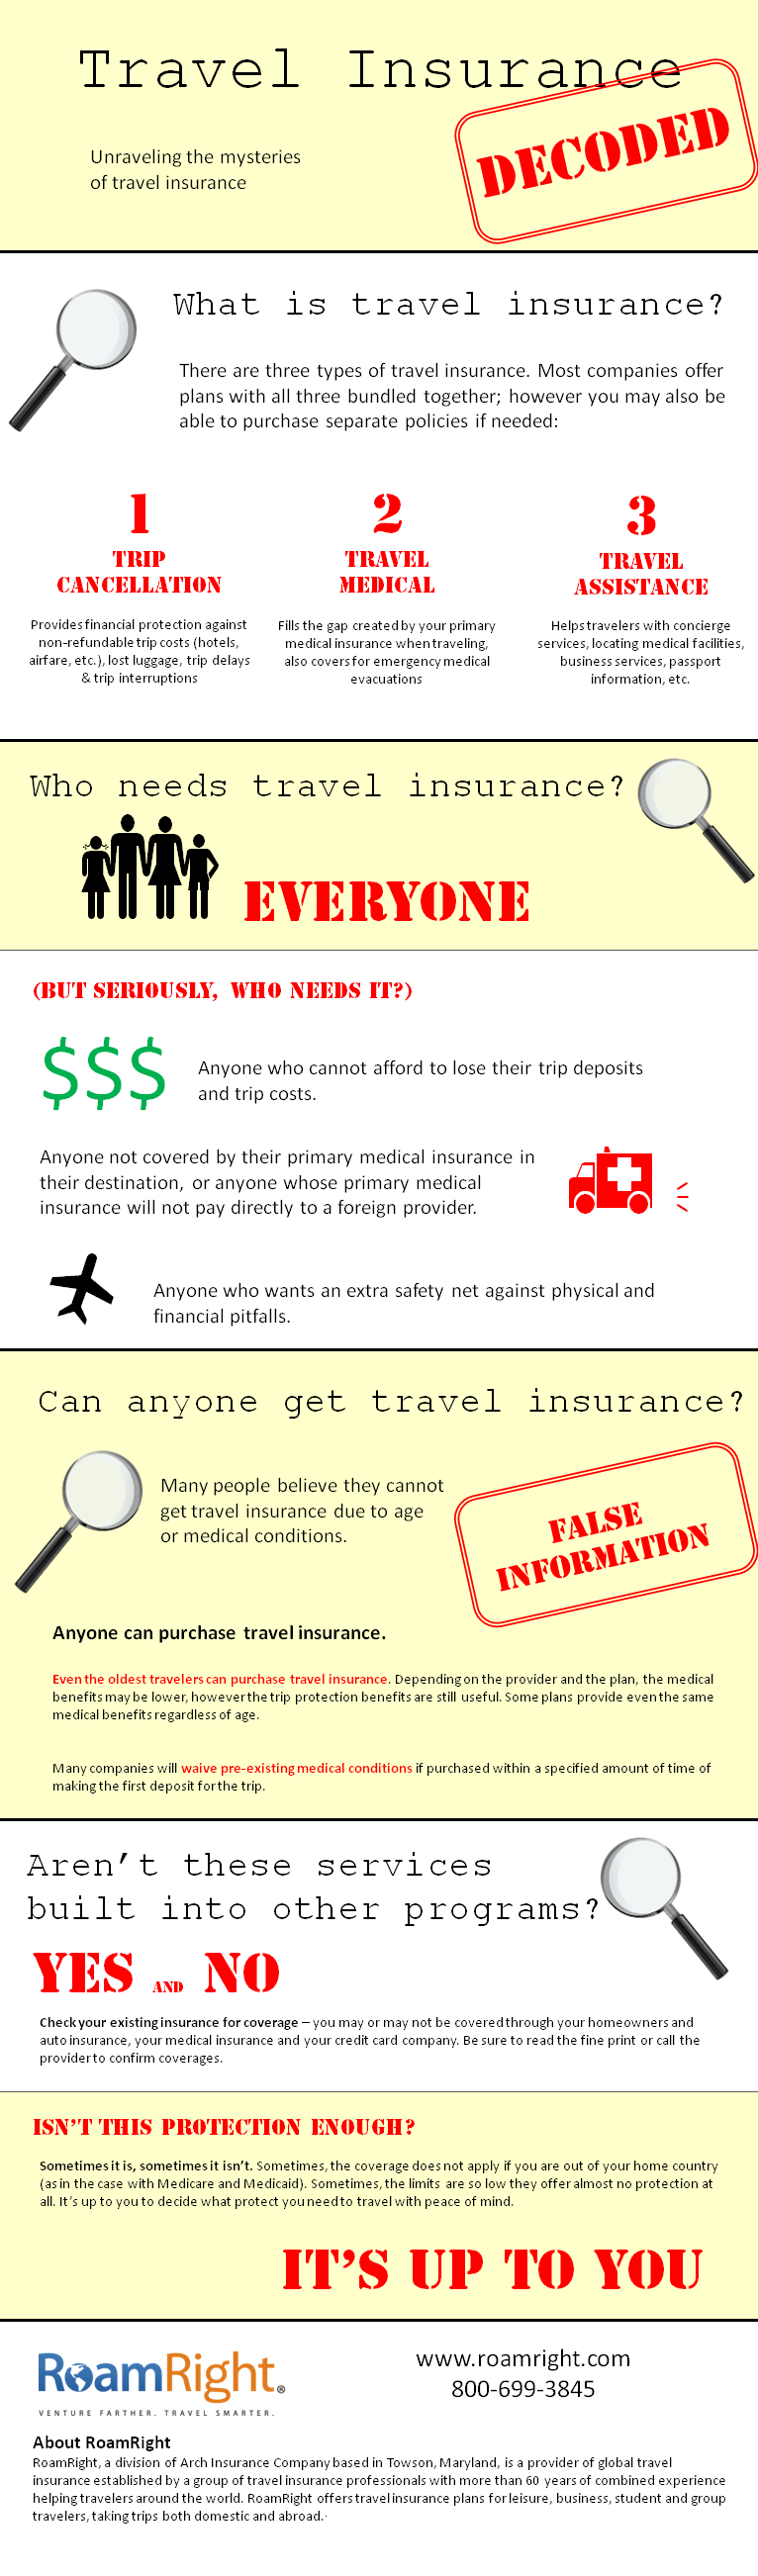 Is travel insurance necessary? This infographic answers this and other questions.